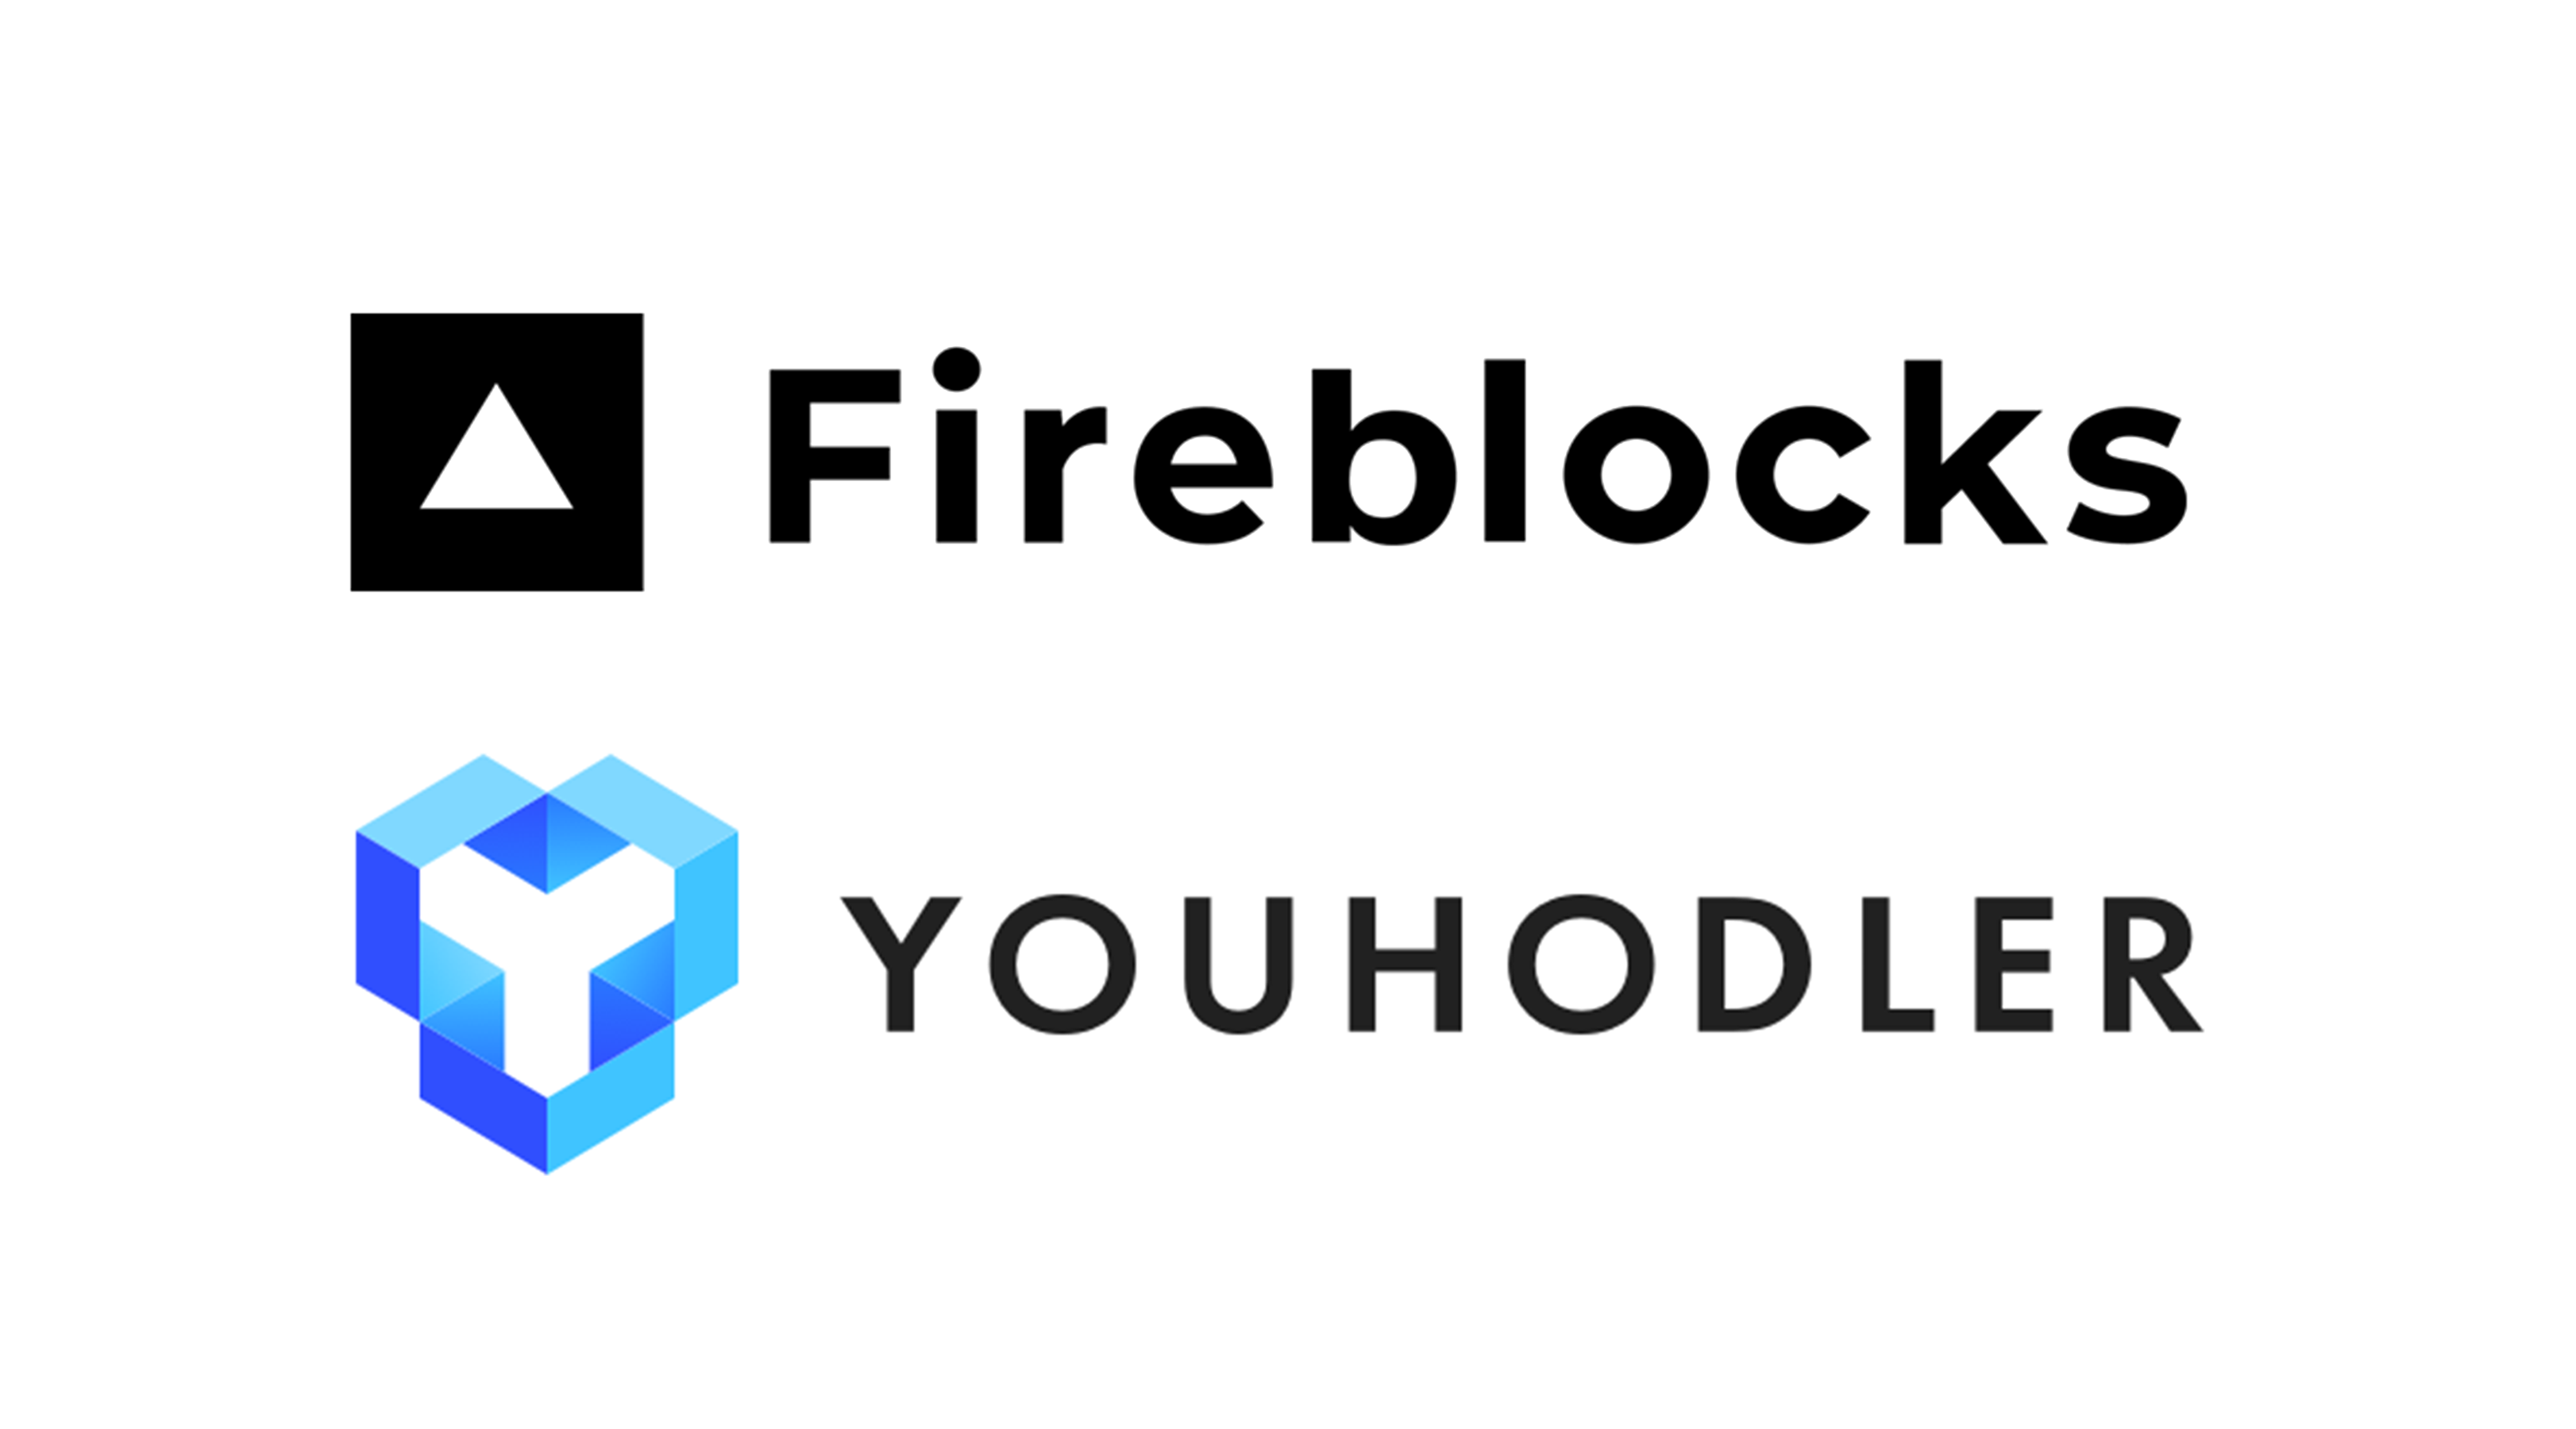 YouHodler Integrates Fireblocks To Secure Its Crypto Transactions